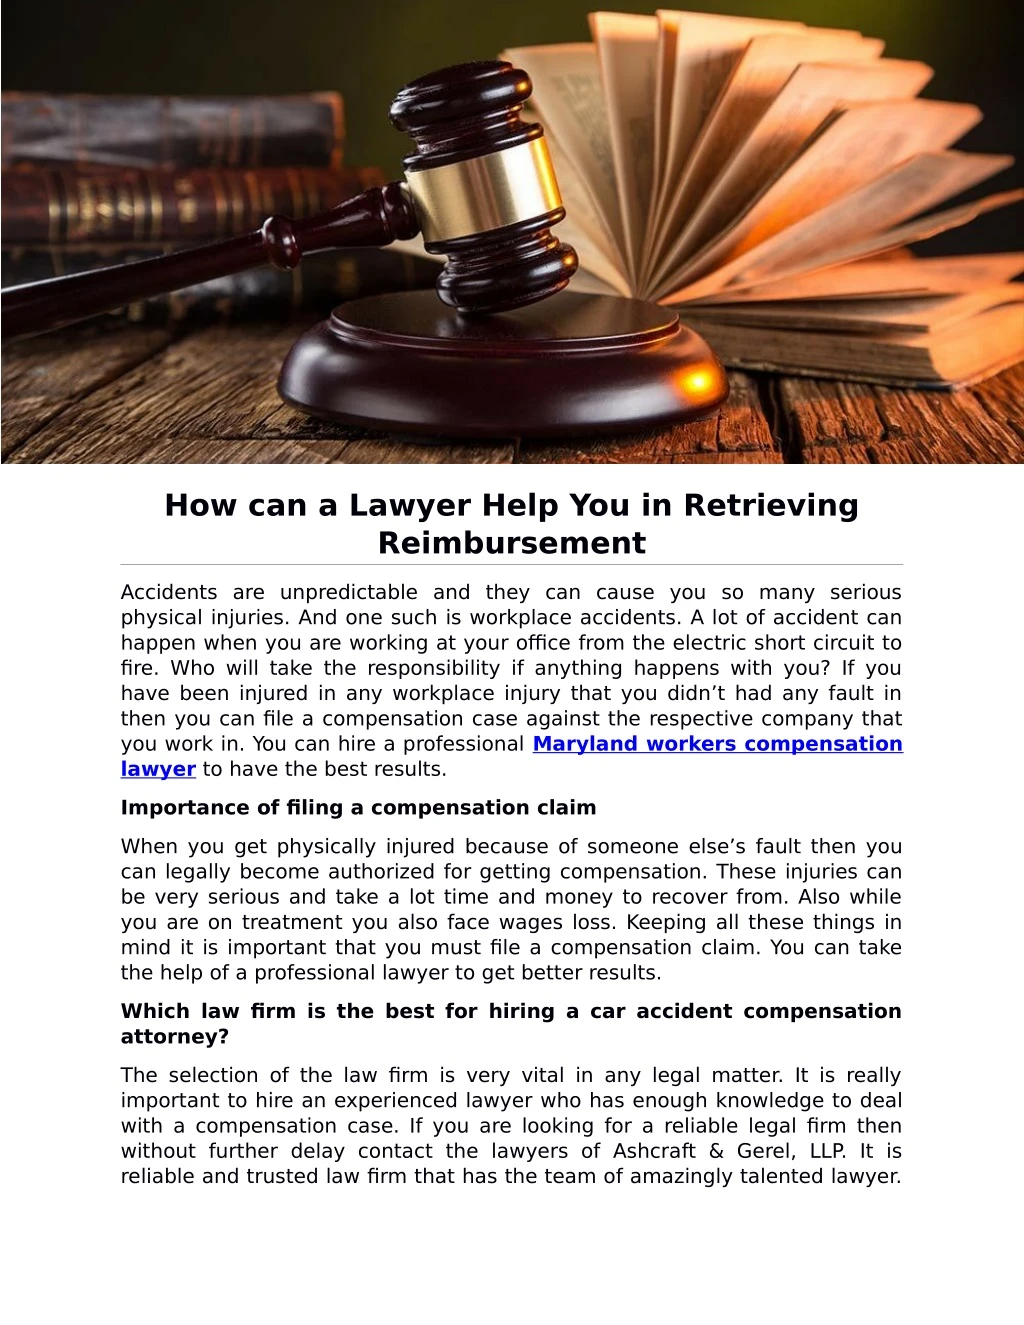 how can a lawyer help you in retrieving